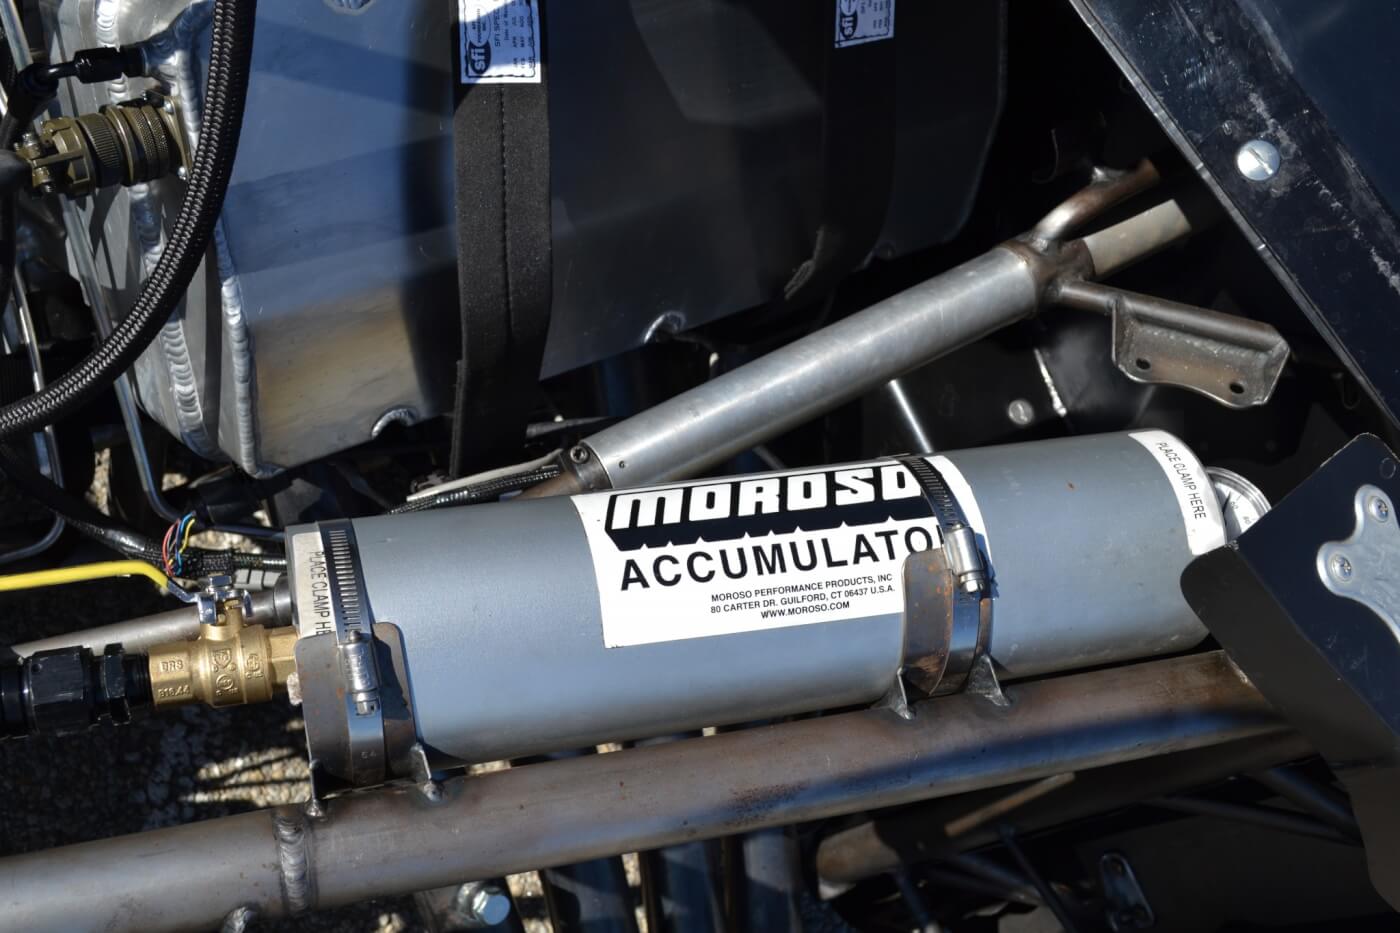 With so many one-off pieces, a Moroso oil accumulator was employed at start-ups to reduce wear. The accumulator will also fire off quarts of oil instantly in case the engine ever loses pressure, to prevent bearing, ring, or other engine damage.